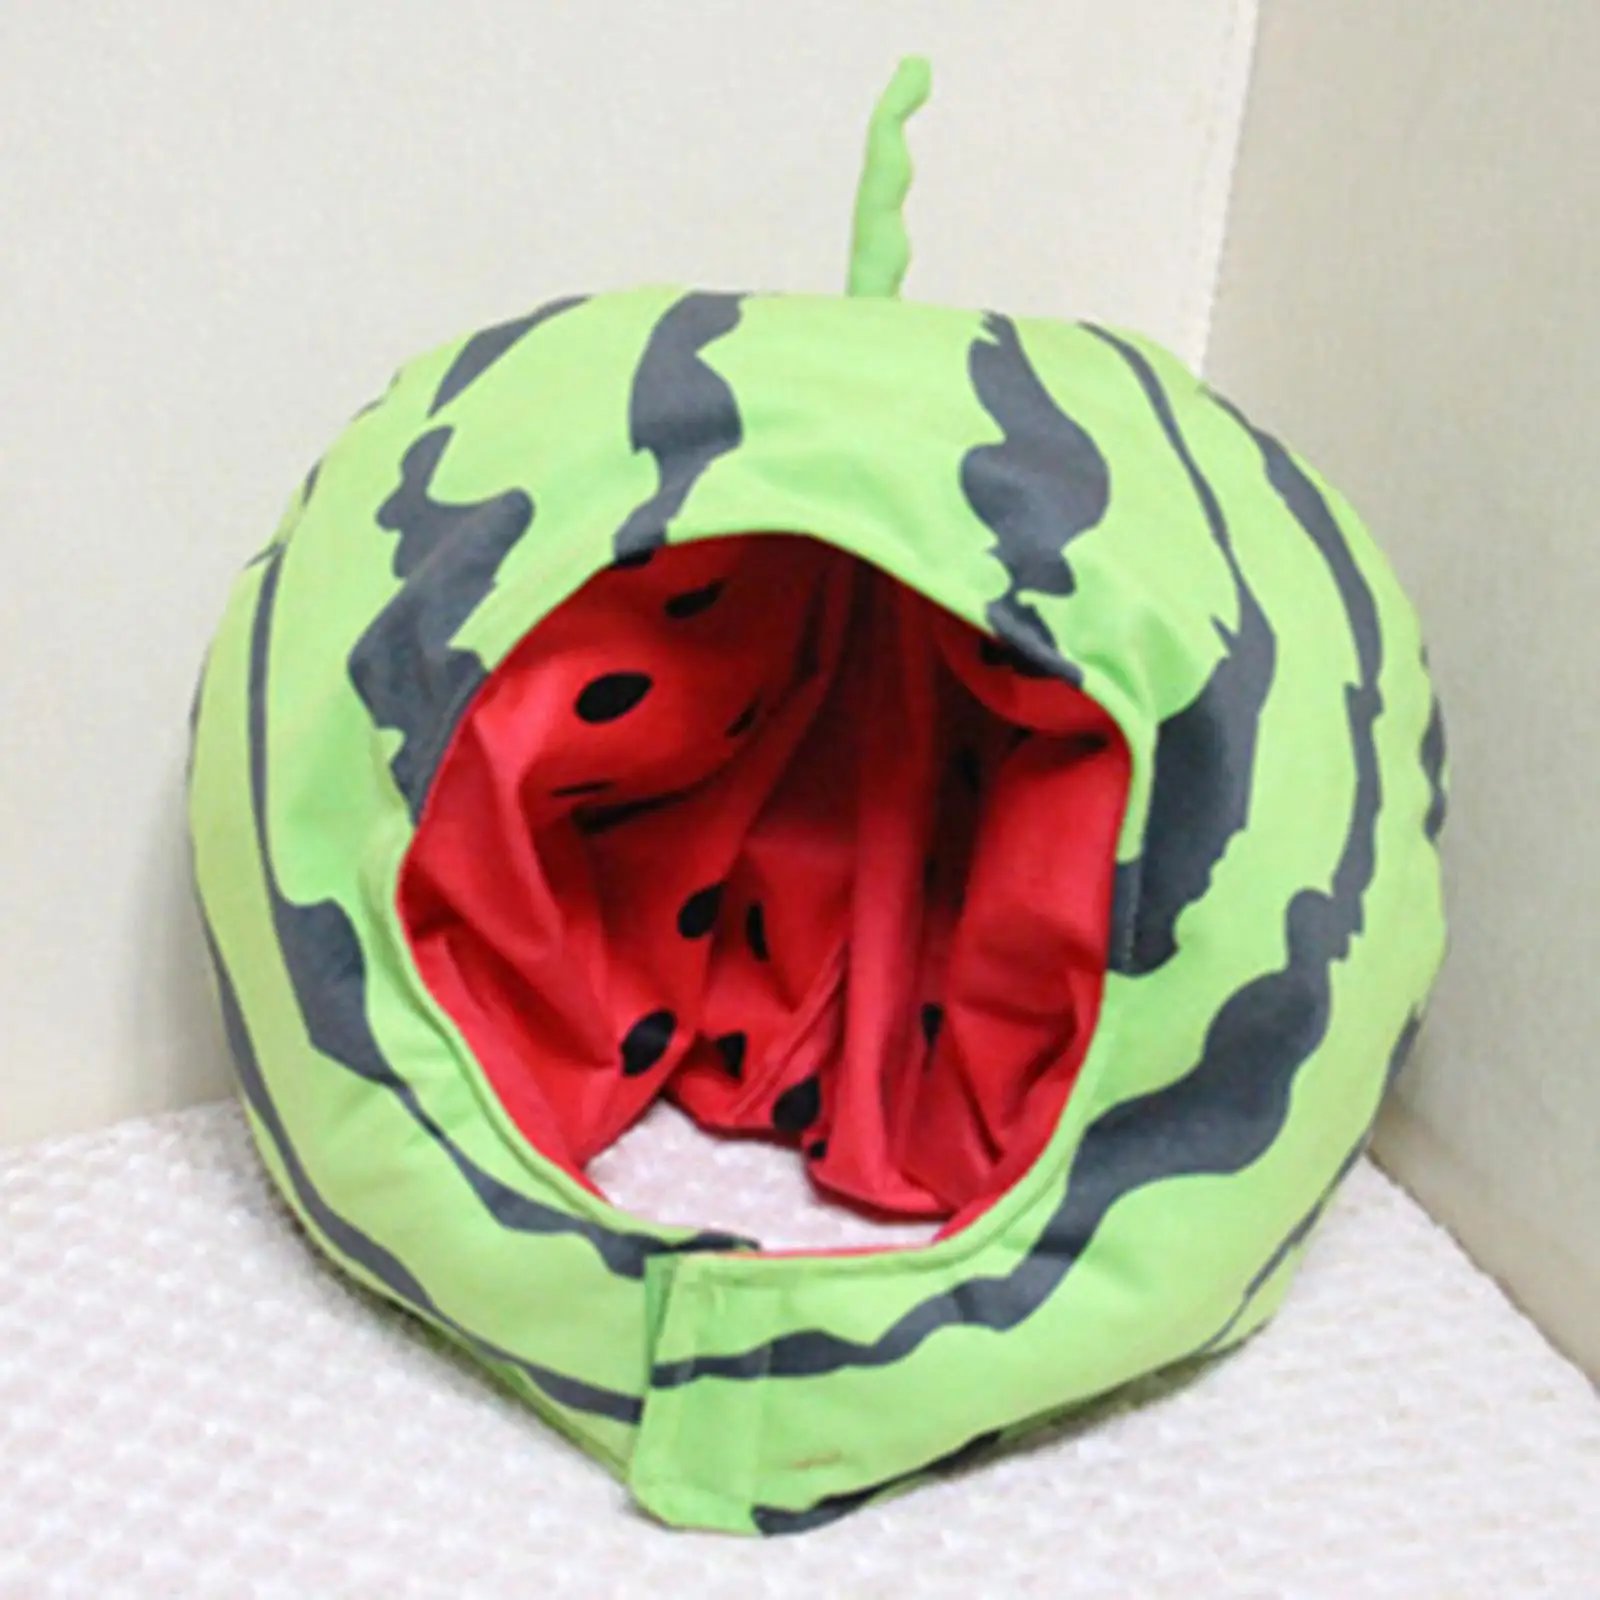 Funny Watermelon Costume Hat Durable Novelty Fruit Headwear for Party Decoration Halloween Performing Props Carnival Cosplay